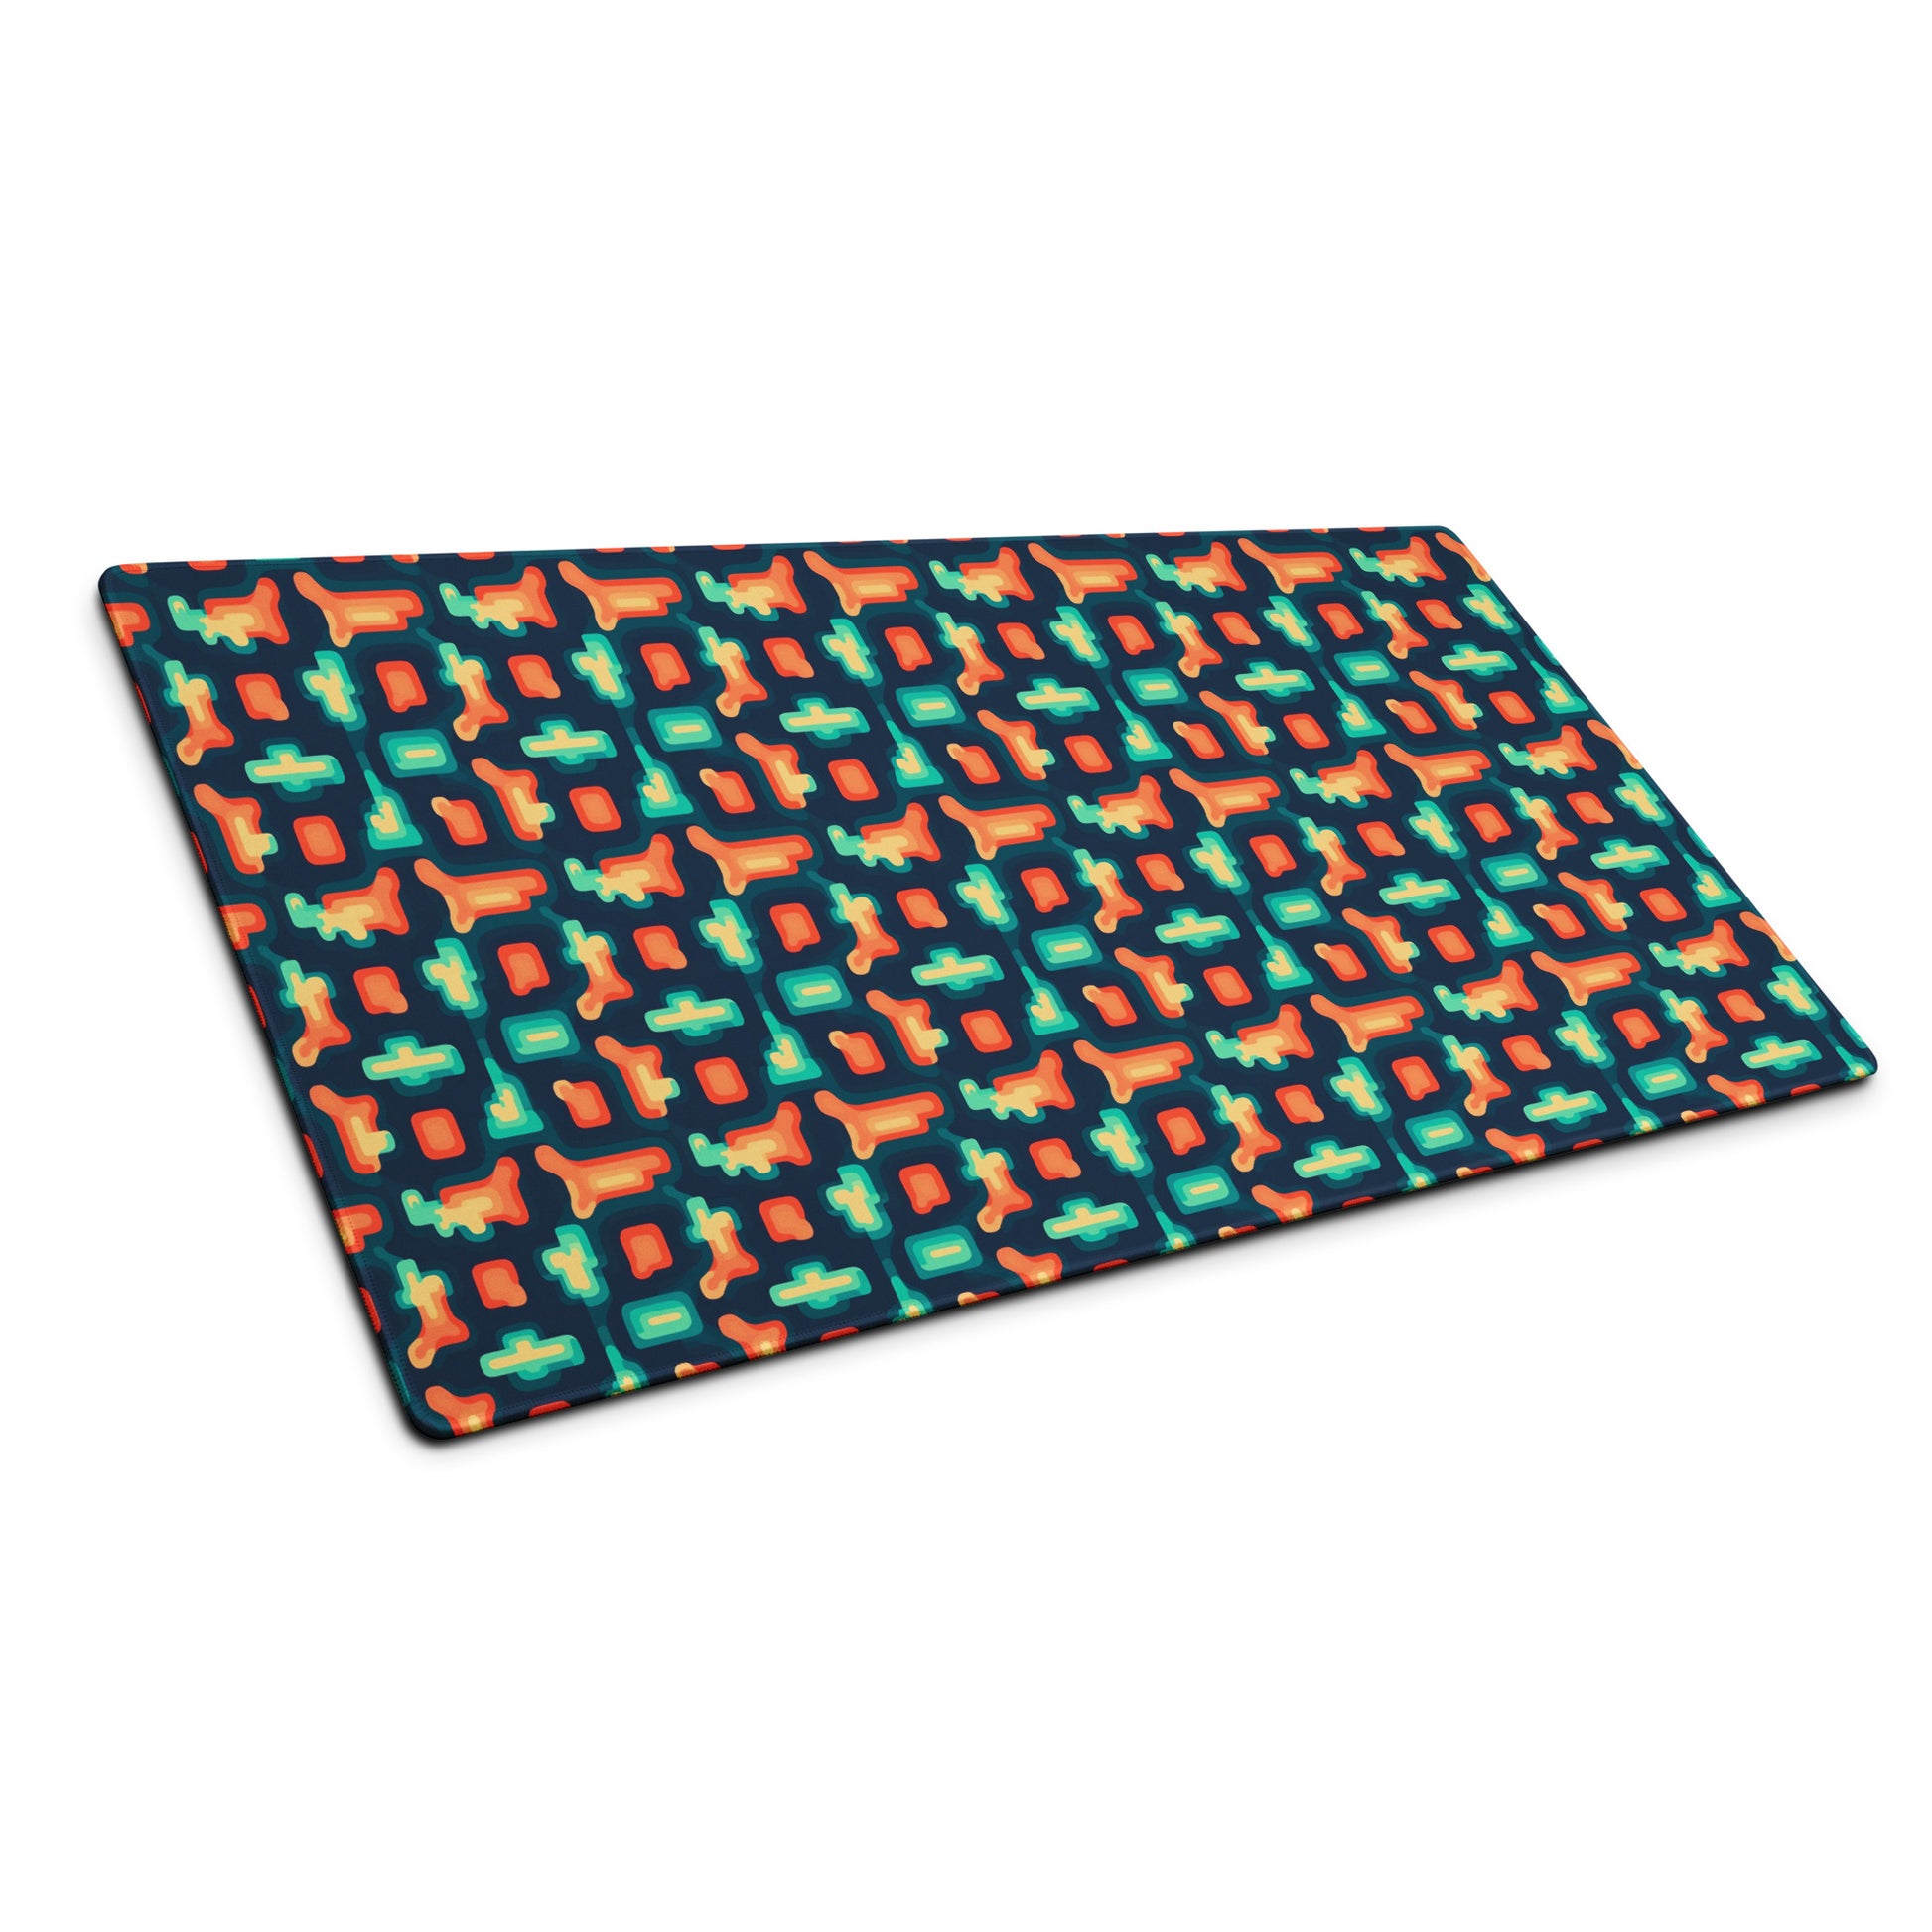 A 36" x 18" gaming desk pad with blue and orange puzzle pieces on a dark blue background sitting at an angle.